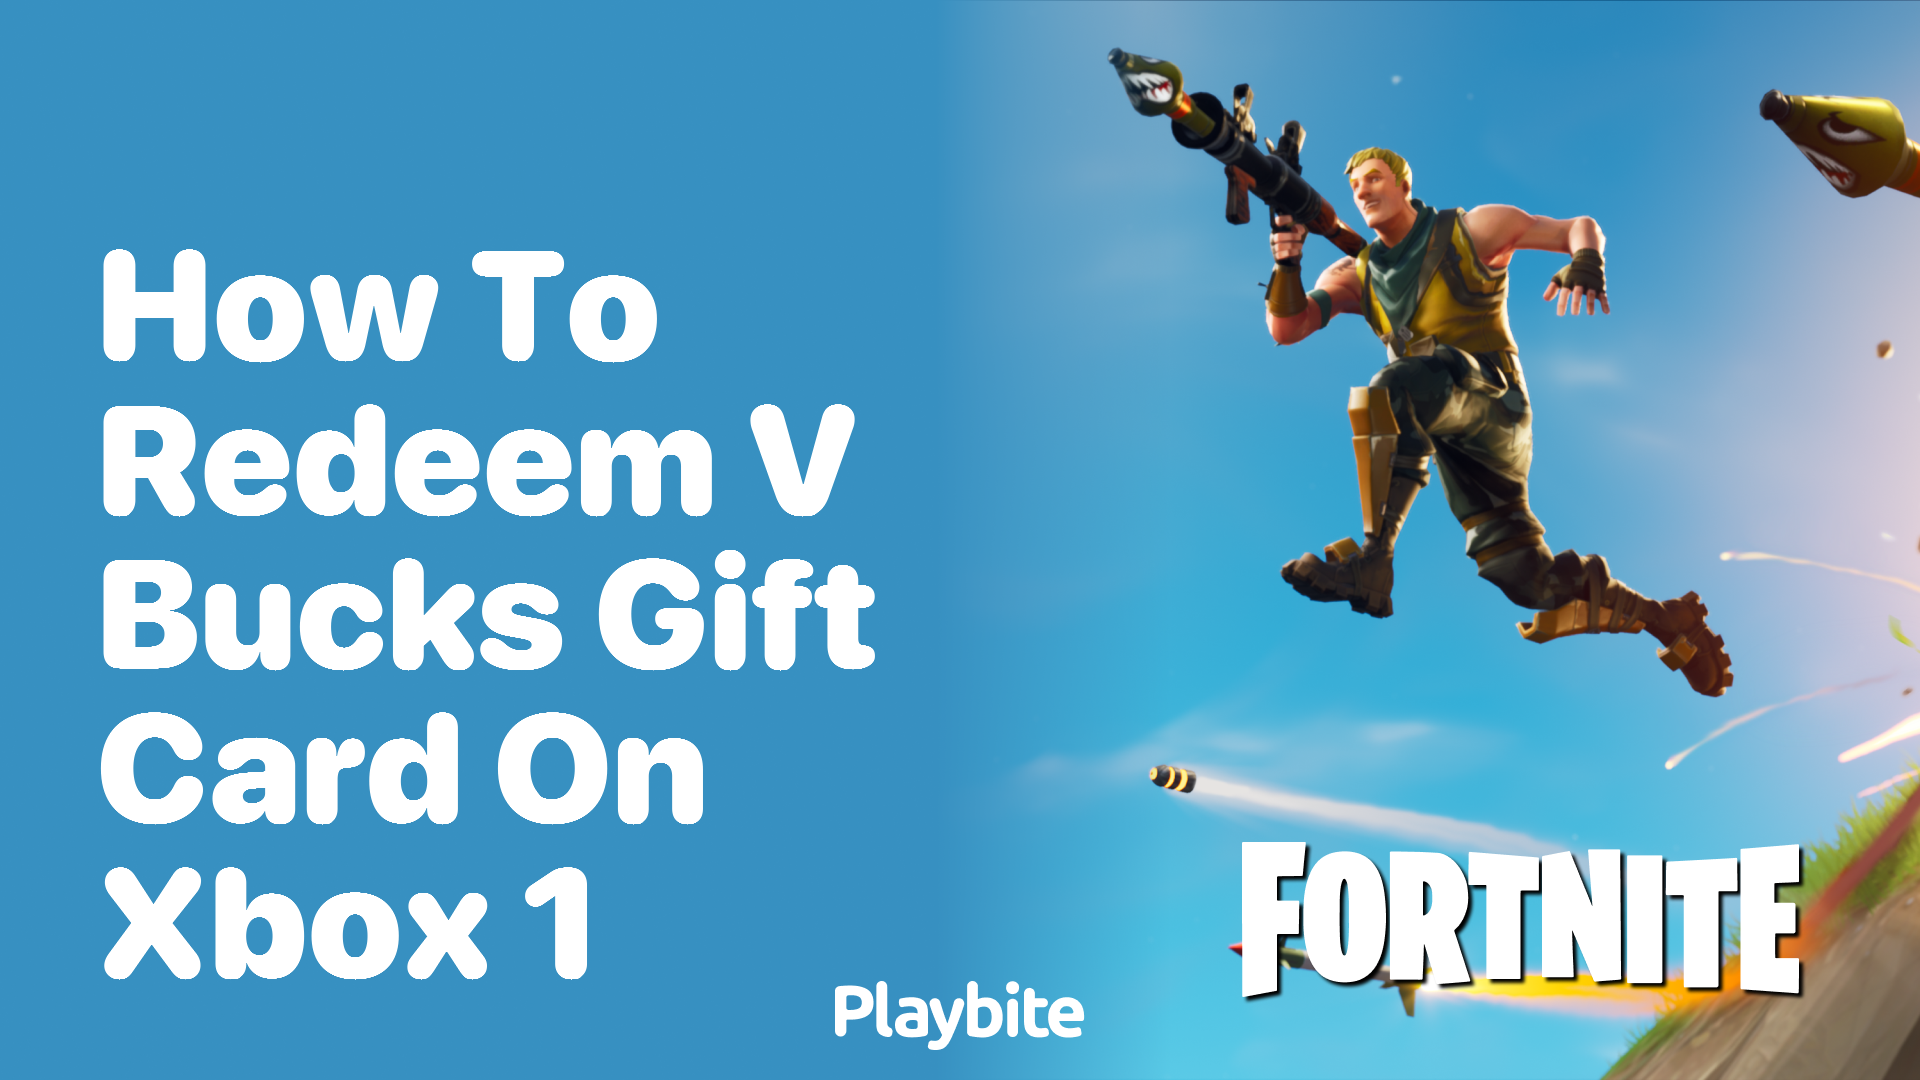 How to Redeem a V-Bucks Gift Card on Xbox One